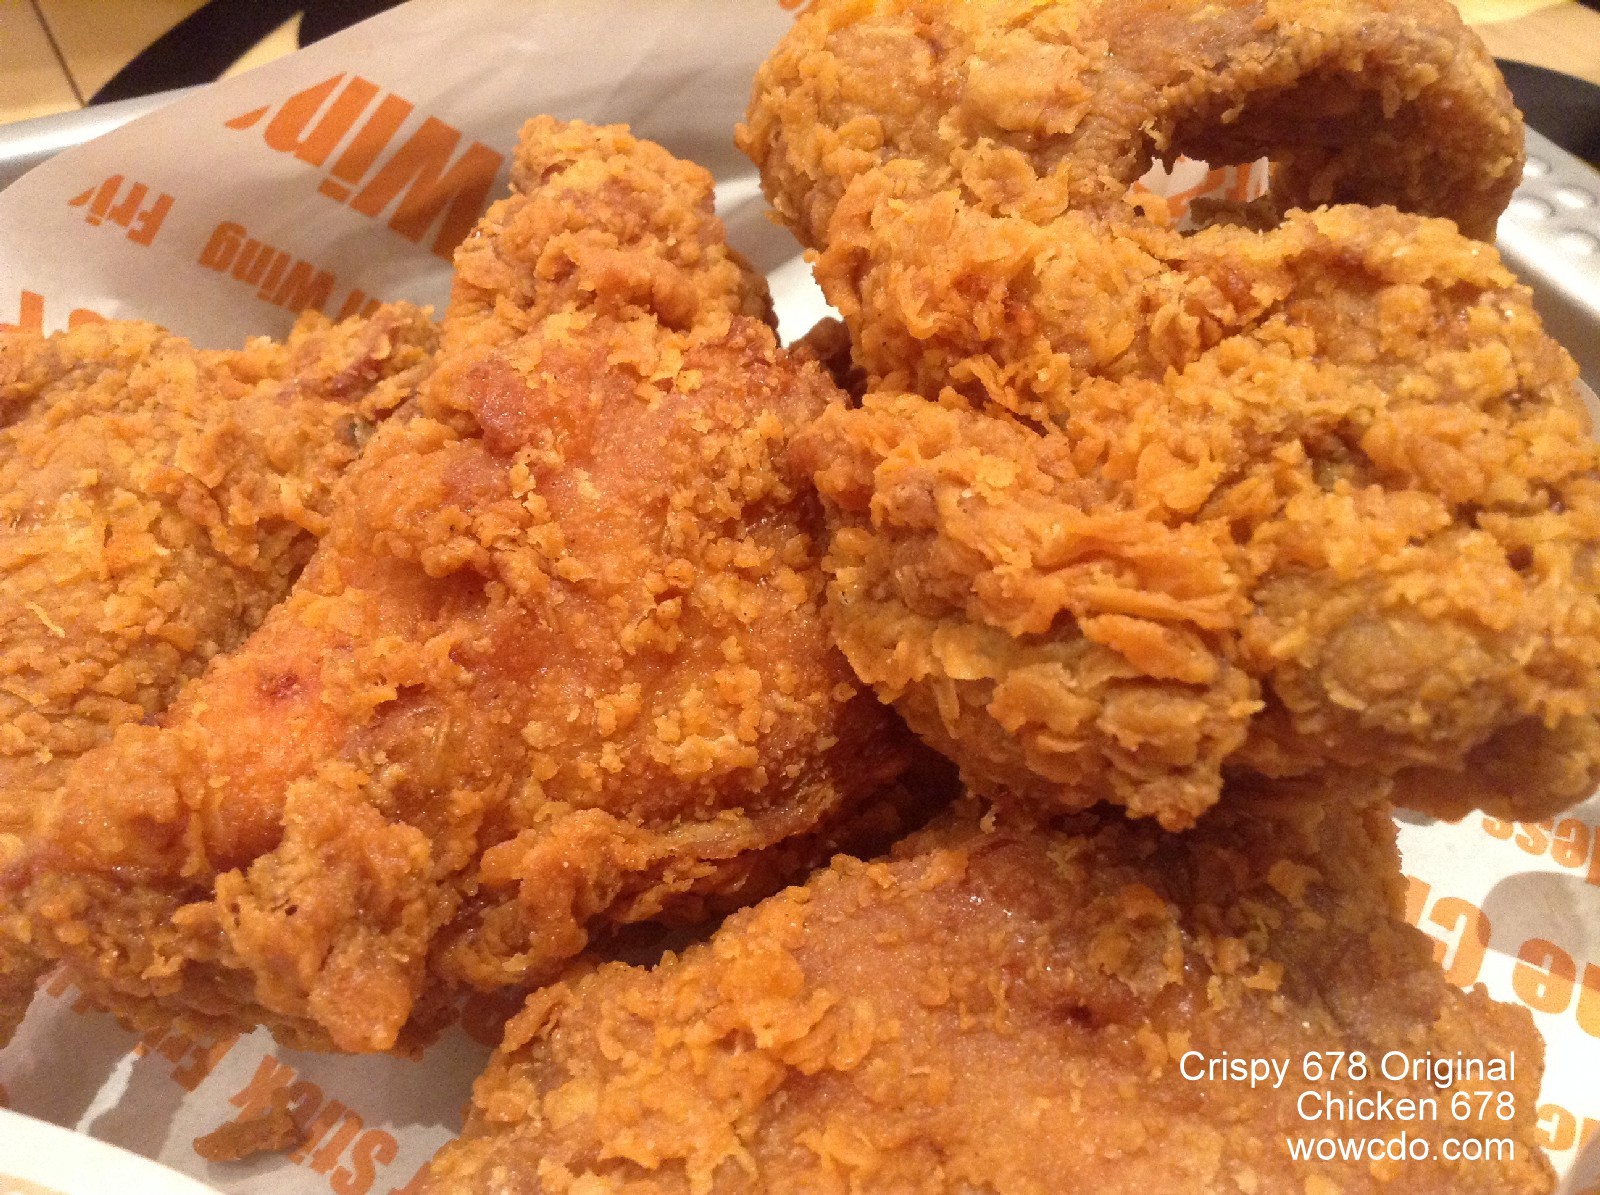 Must Try at “Chicken678”, The Newly Opened Korean Fried Chicken Restaurant in CDO